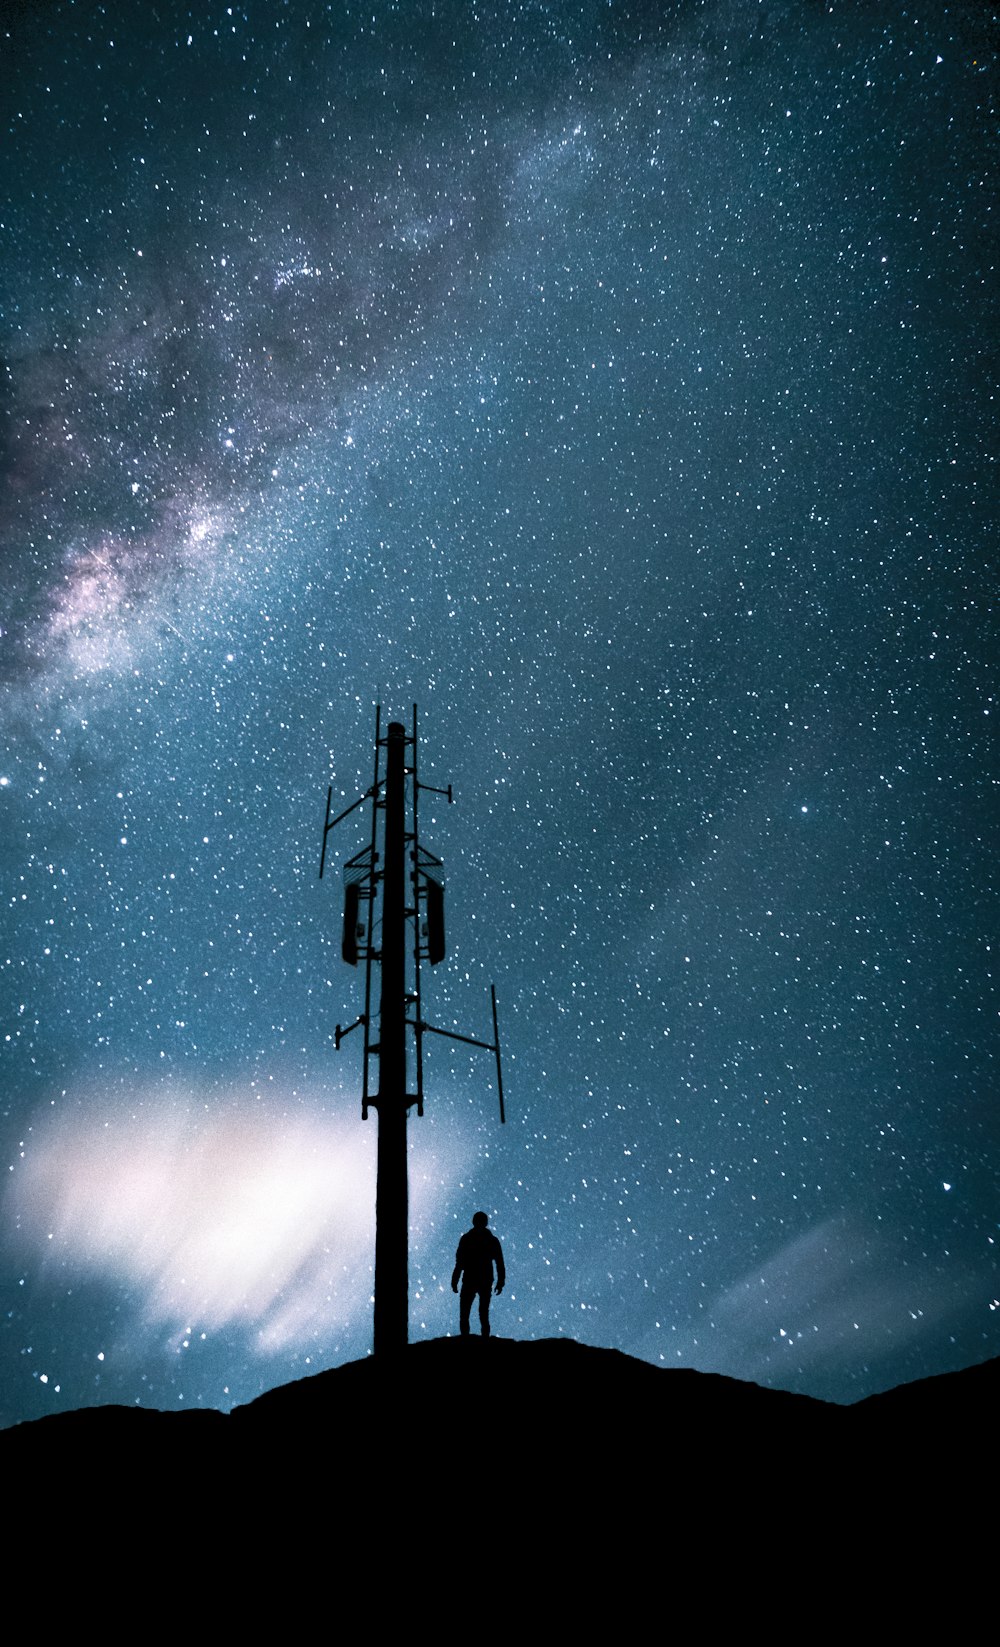 silhouette of people standing on top of electric post under starry night